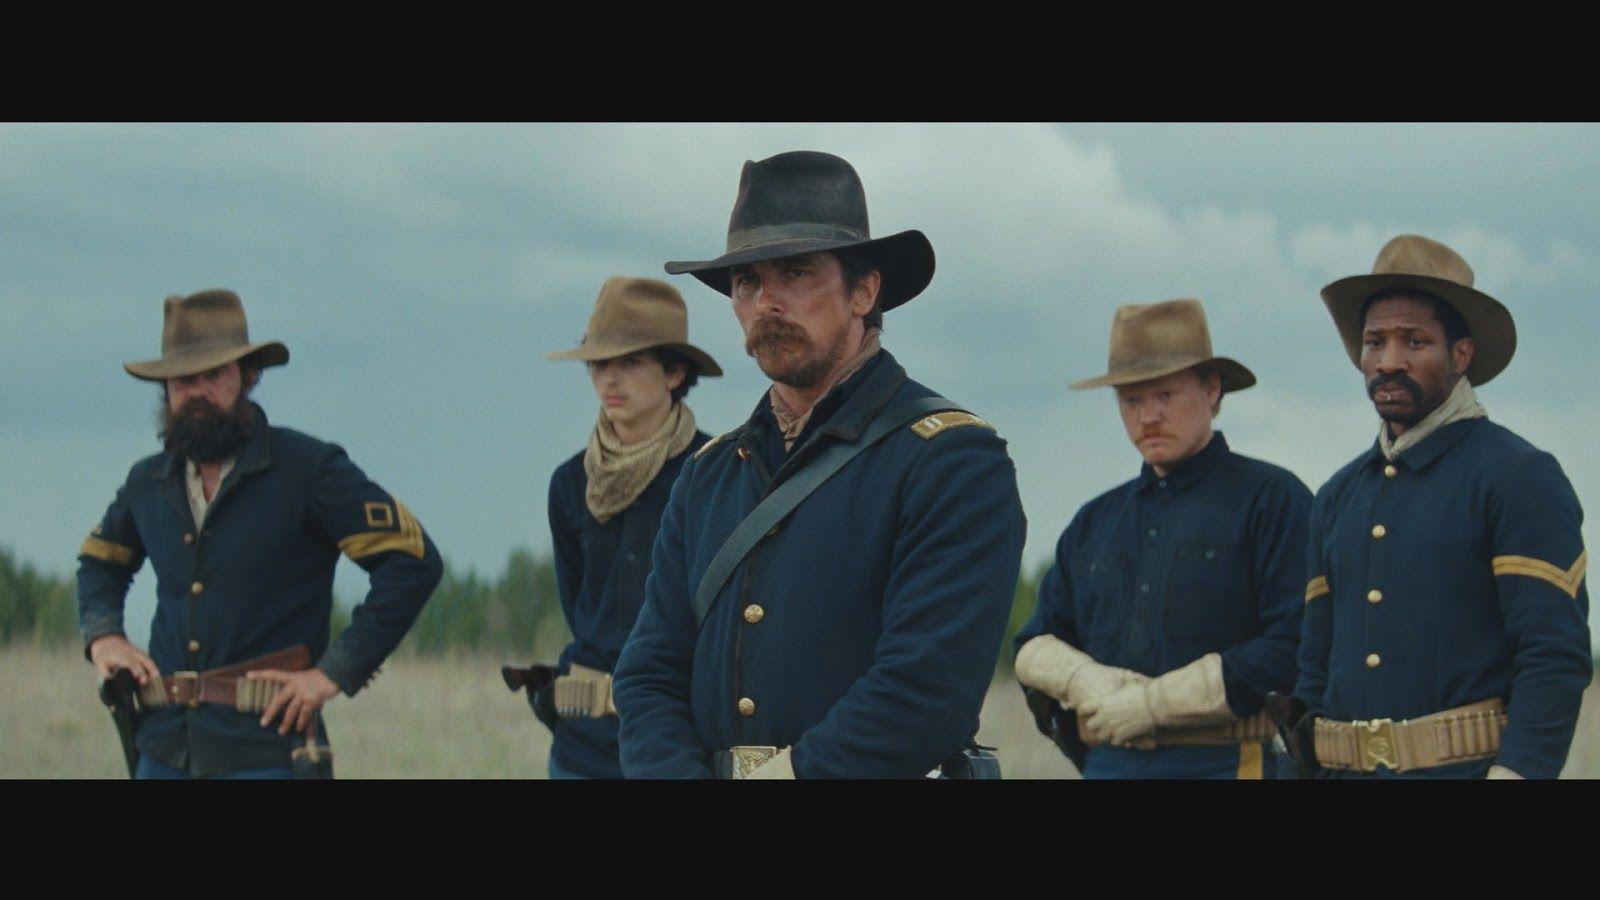 free download of the new movie hostiles